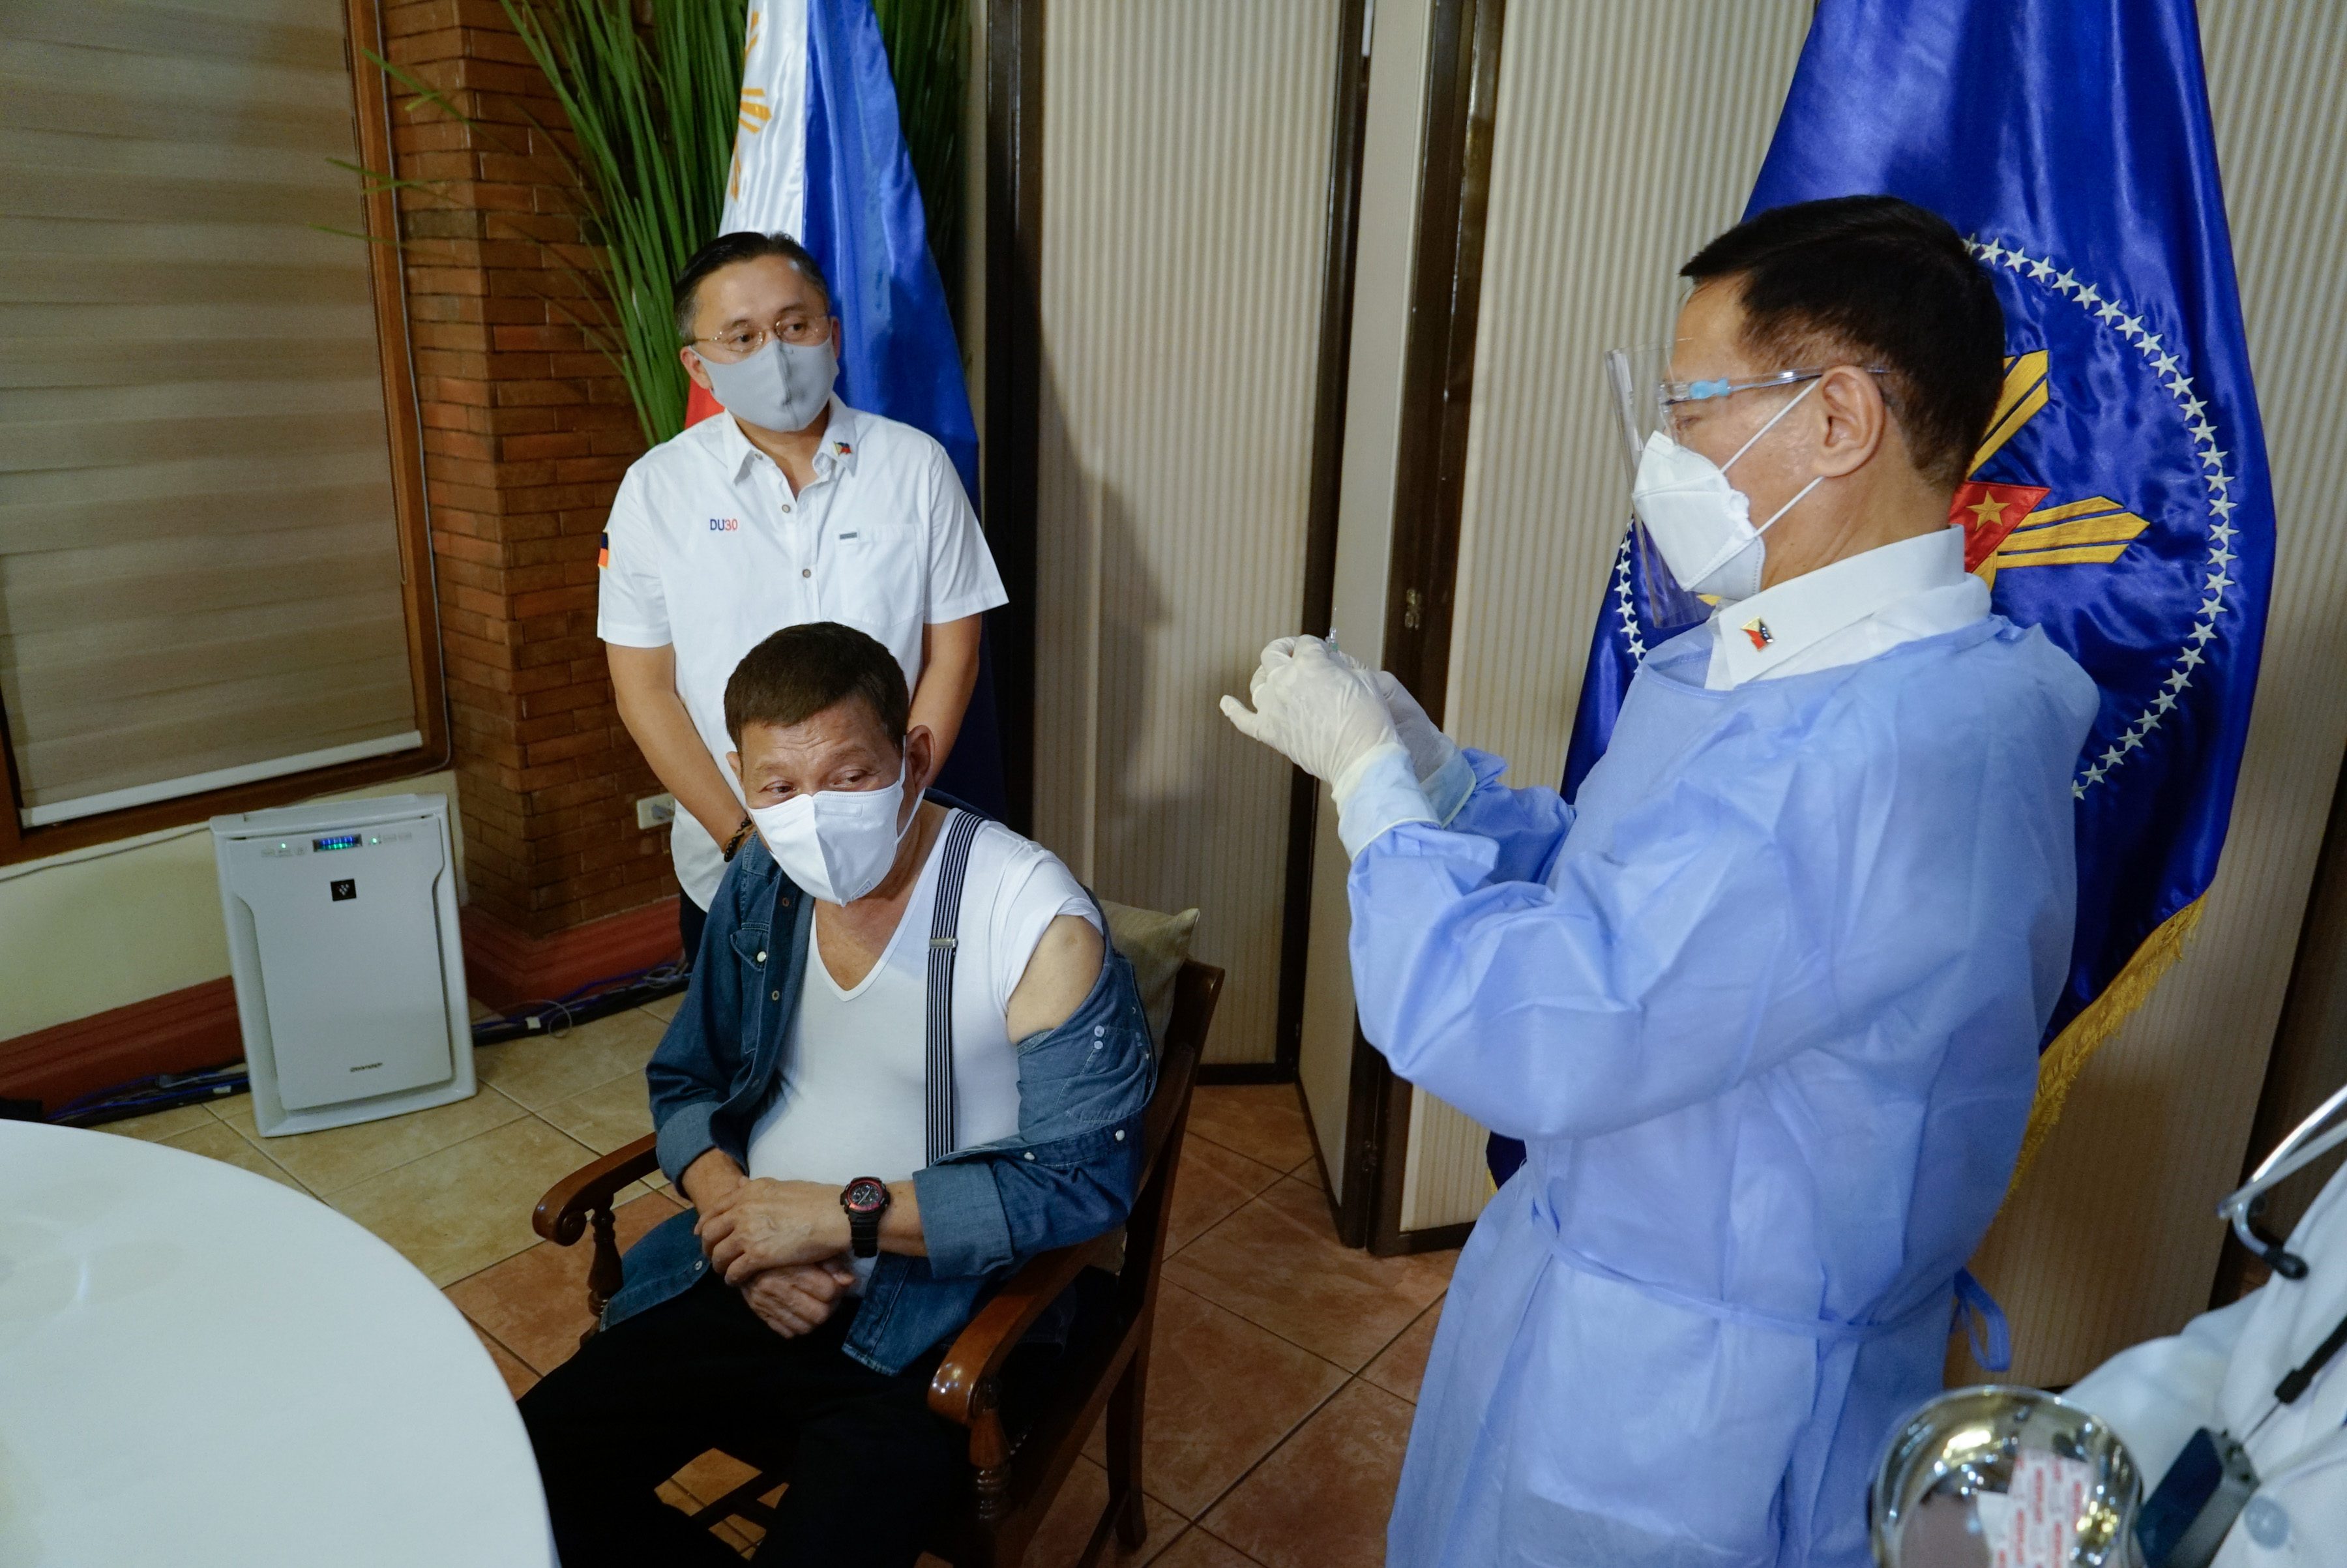 Duterte, bristling at criticism, asks China to take back Sinopharm vaccine donation